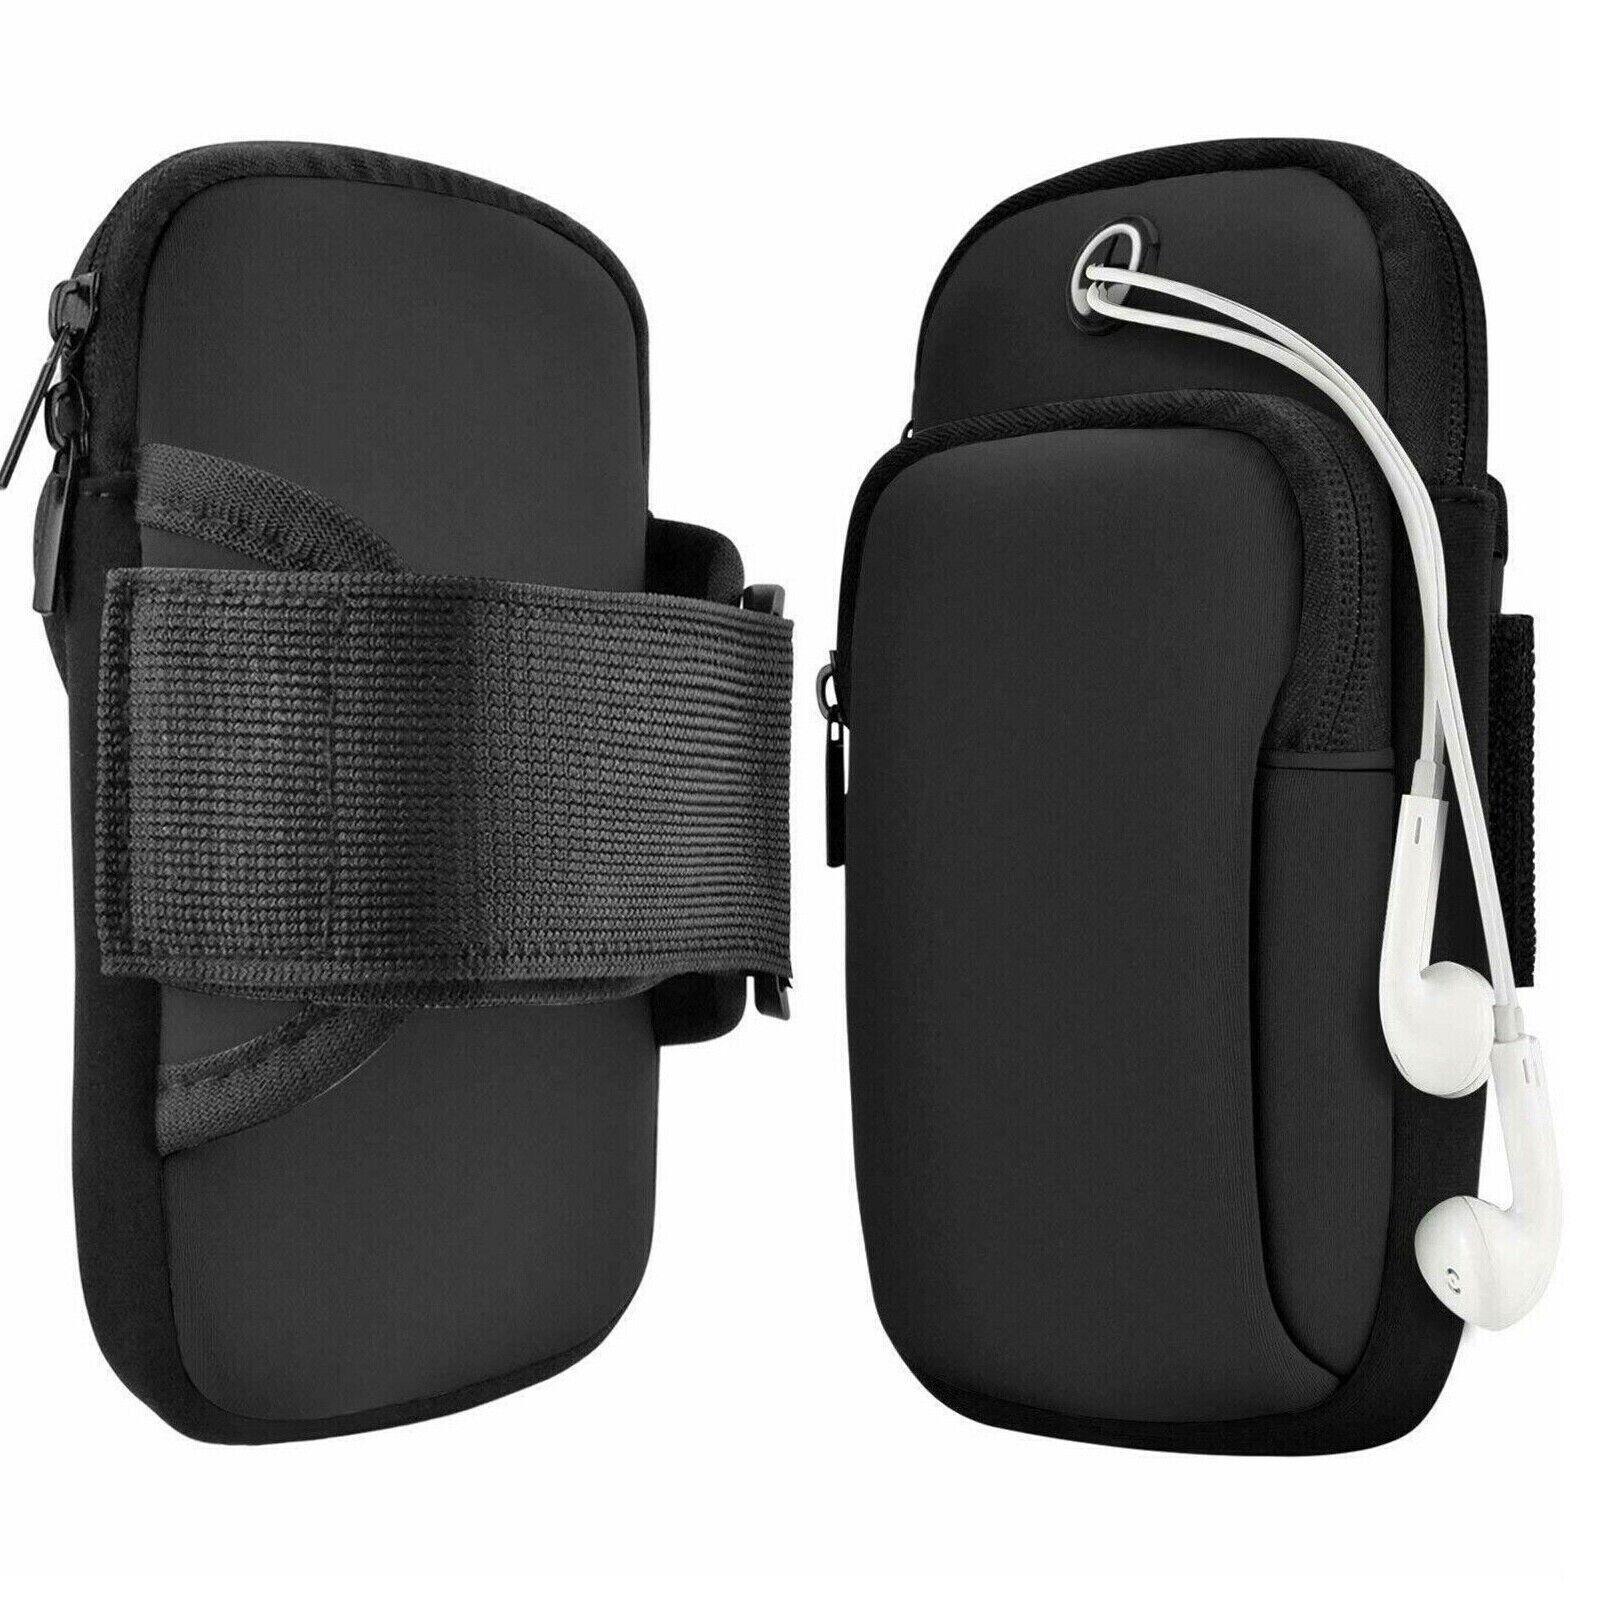 Arm Band Mobile Phone Holder Bag Sports Running Jogging Gym Exercise Pouch Case